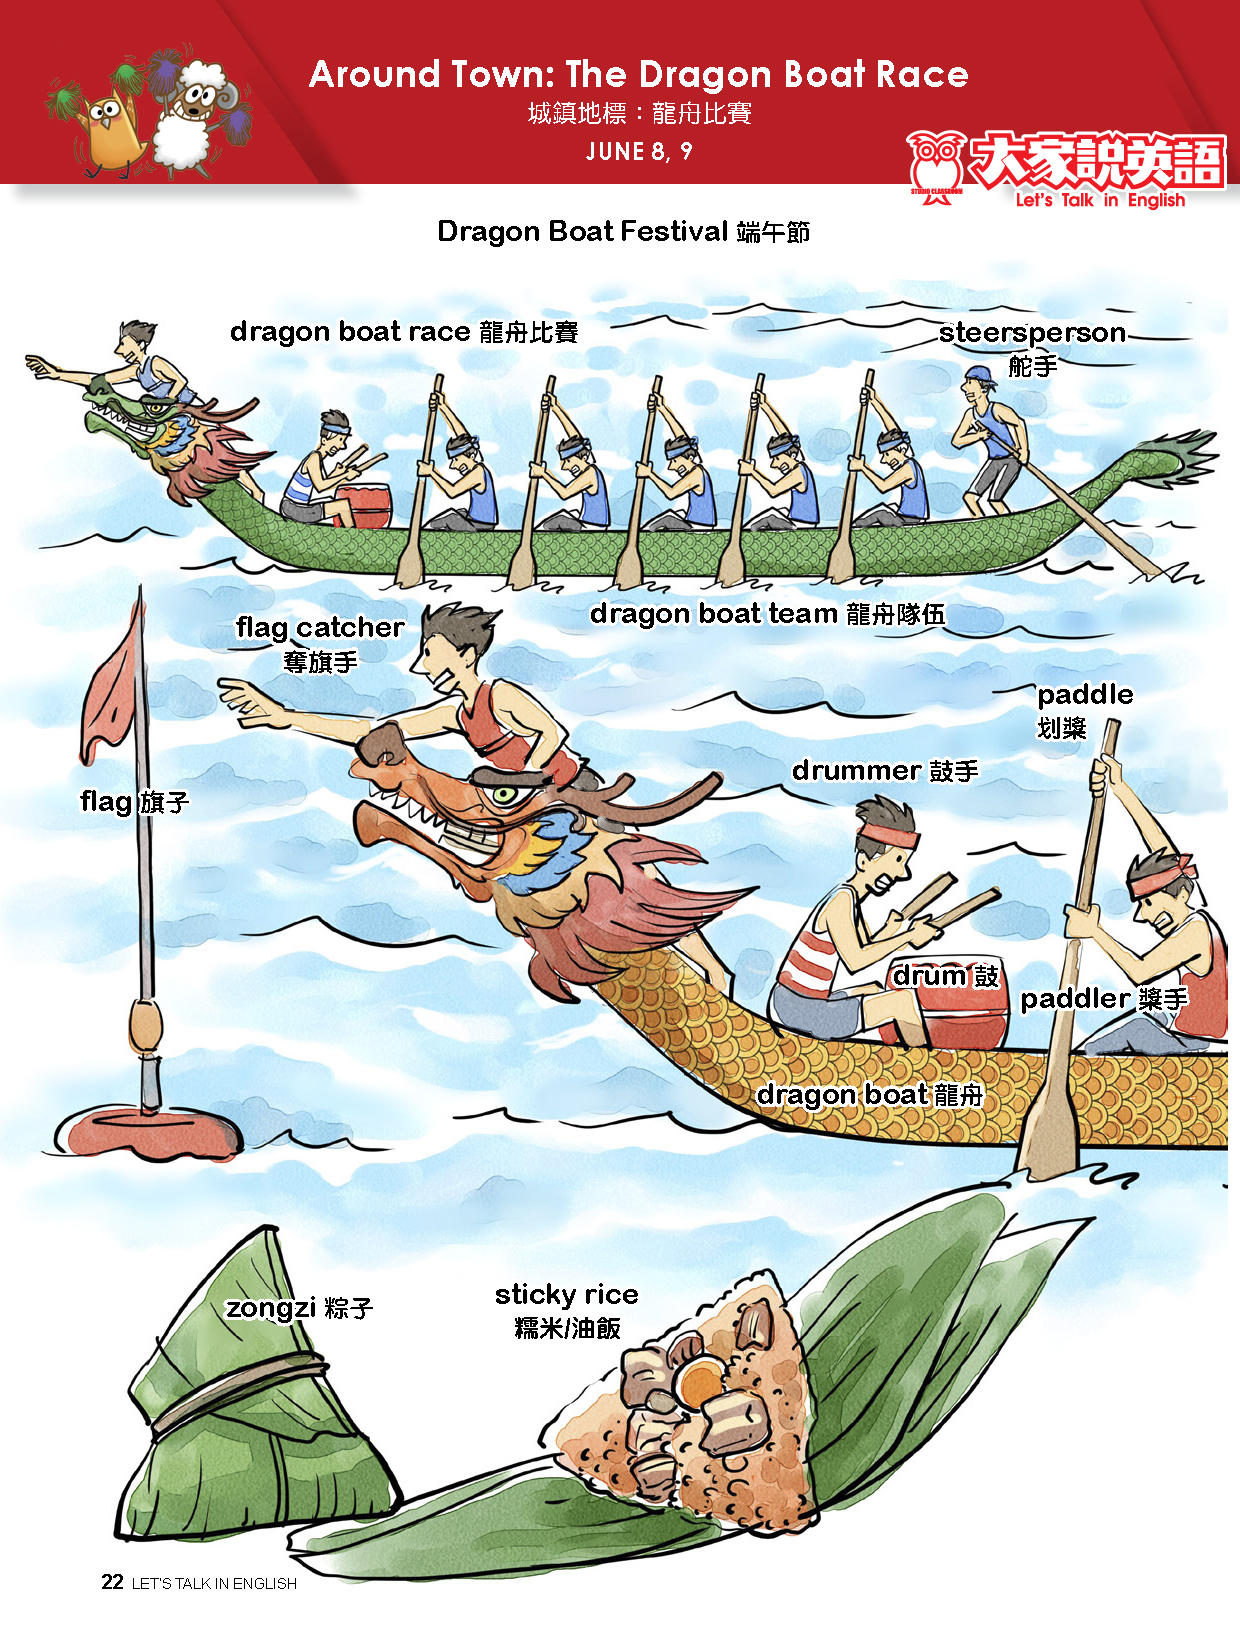 【Visual English】Around Town: The Dragon Boat Race